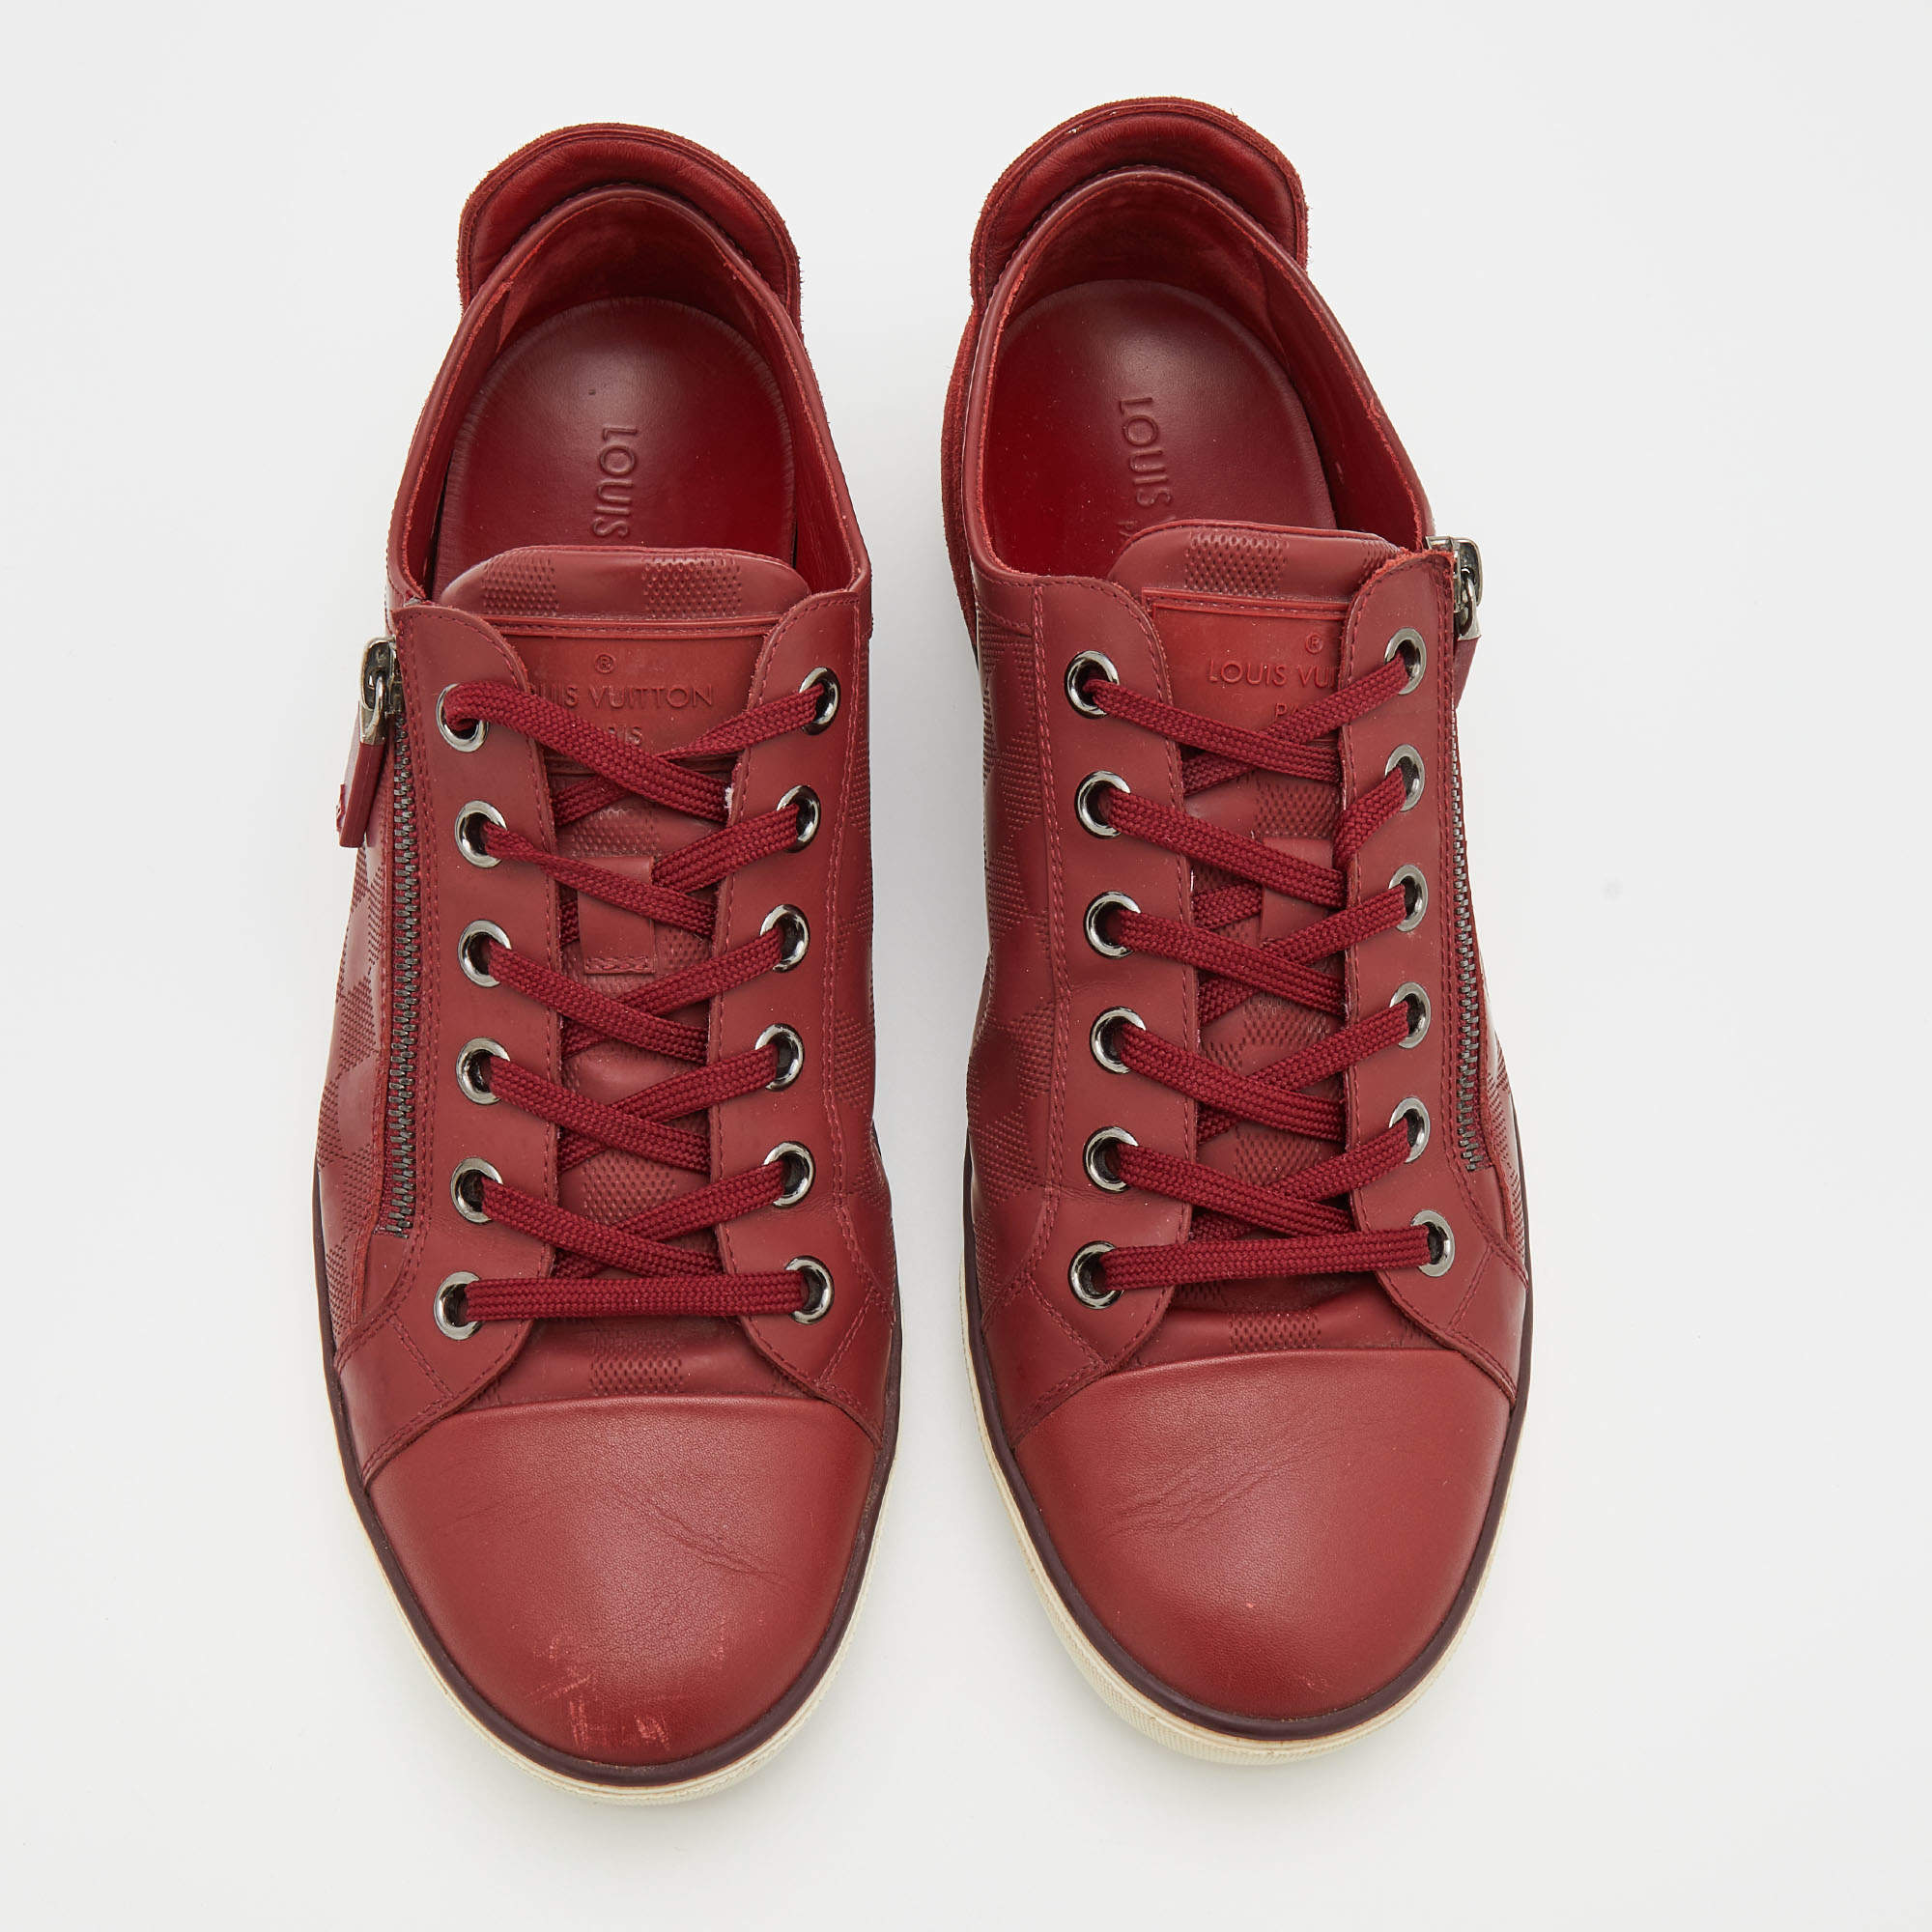 Men's Louis Vuitton low top tennis shoes,red lamb leather and suade.